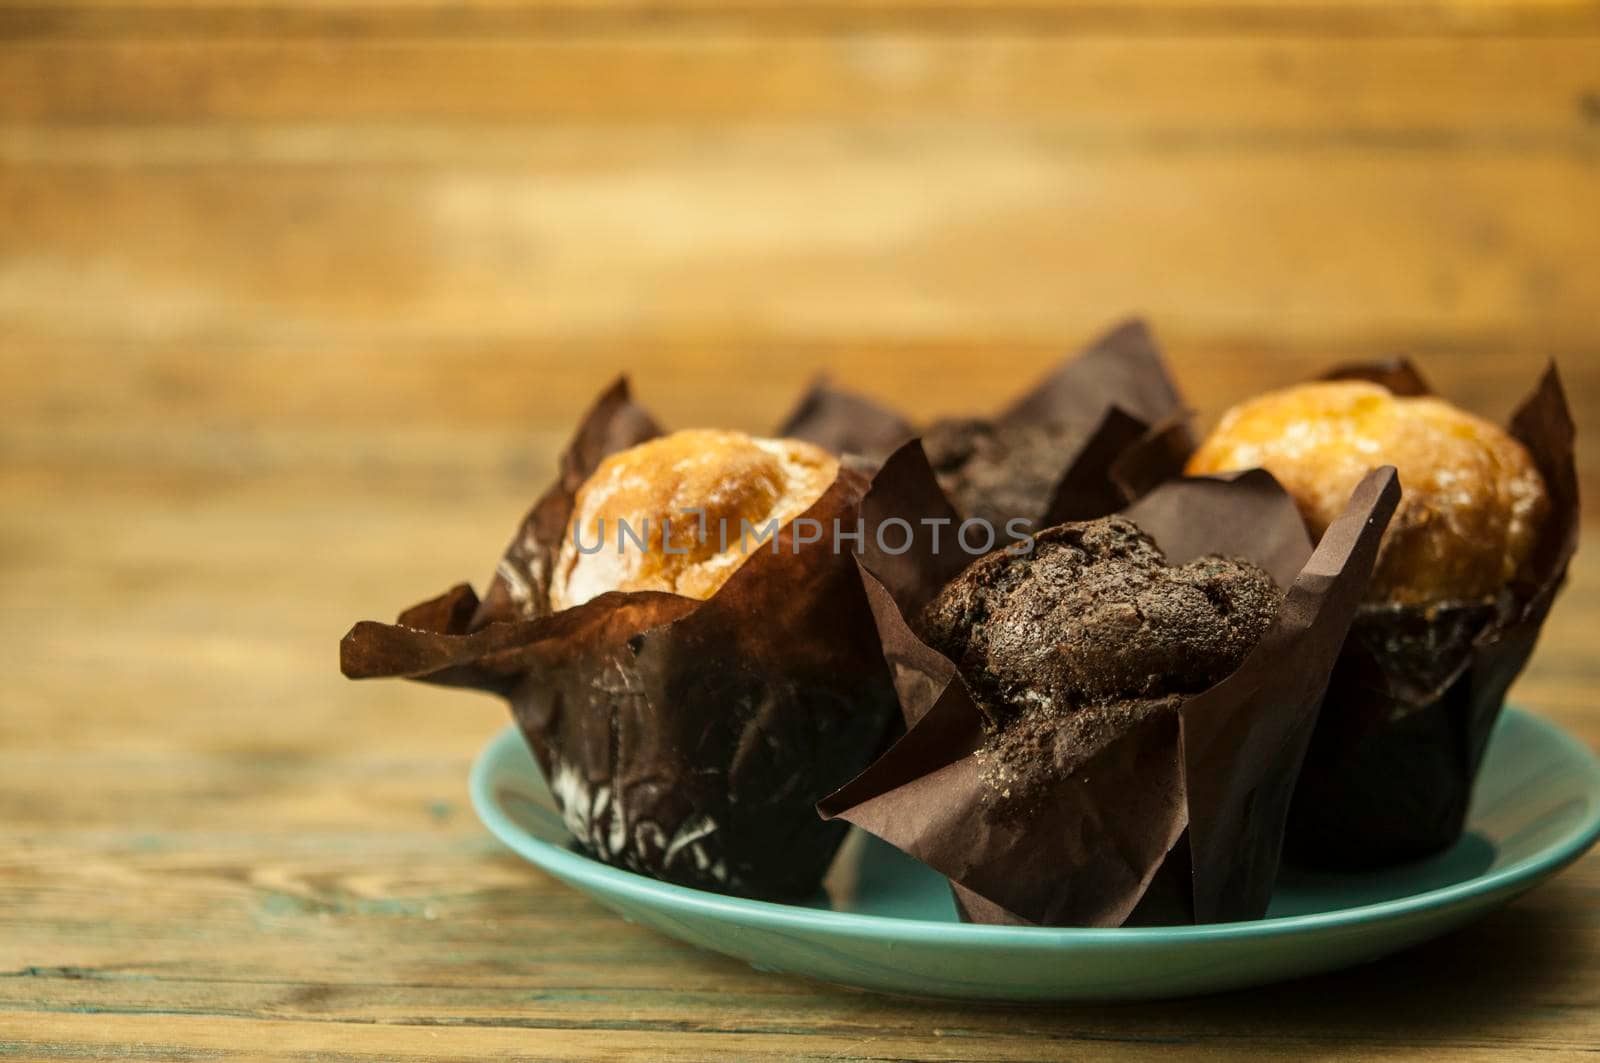 Homemade chocolate and vanilla cupcakes lie on ceramic plate on a wooden table, sprinkled with powdered sugar. Breakfast by inxti